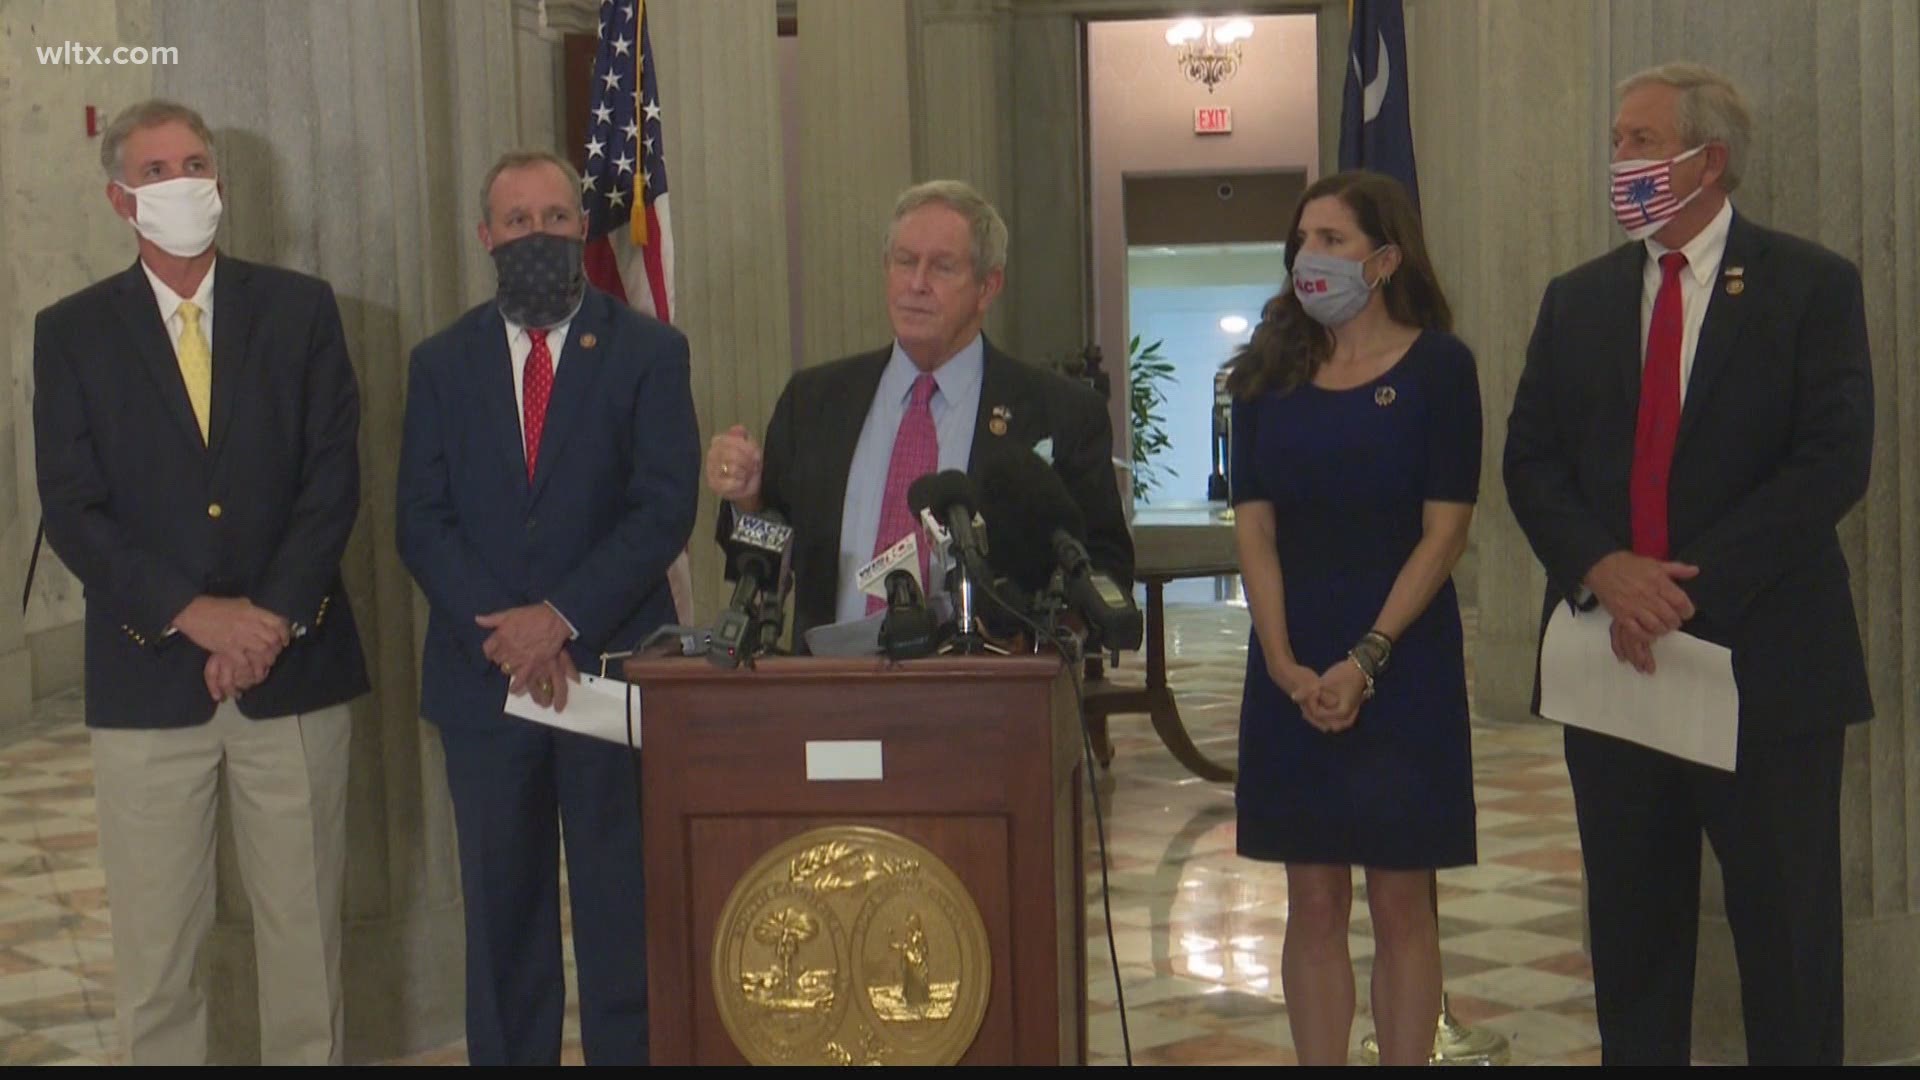 Congressman Joe Wilson says he along with several other colleagues want to improve the election process.